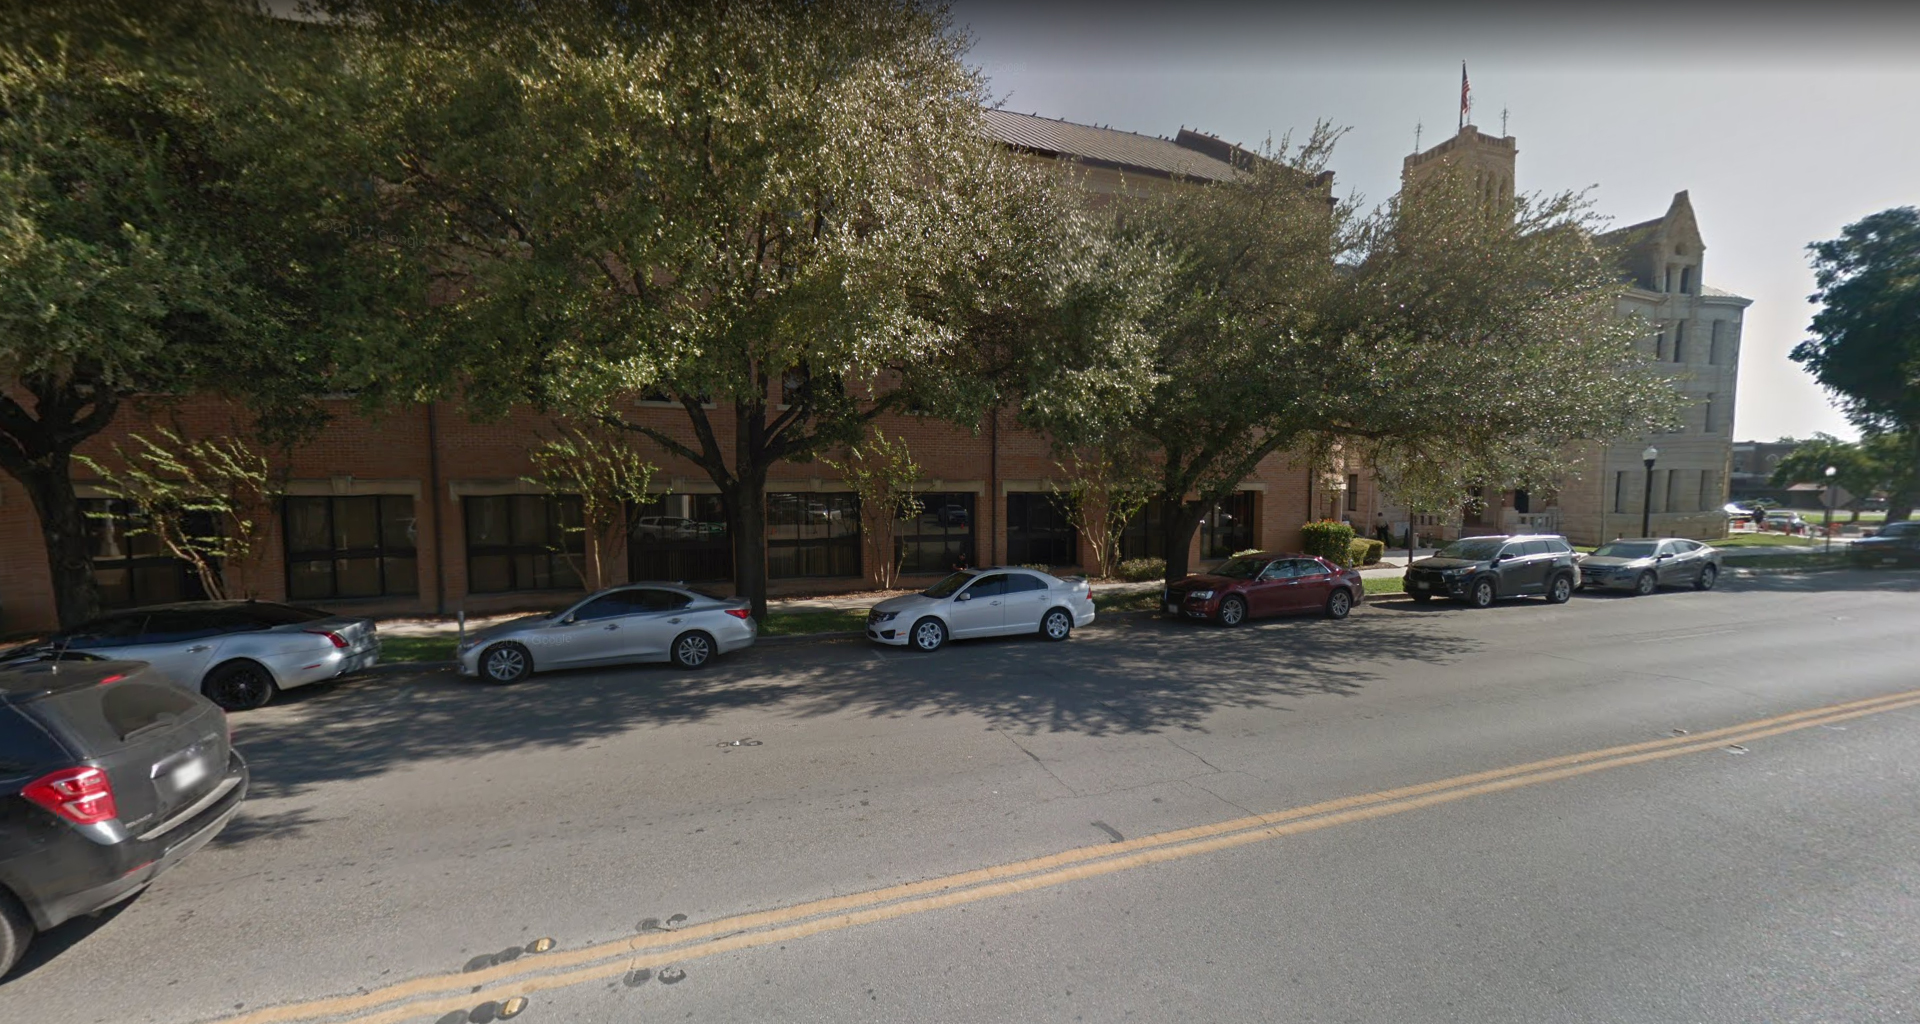 comal county filed documents